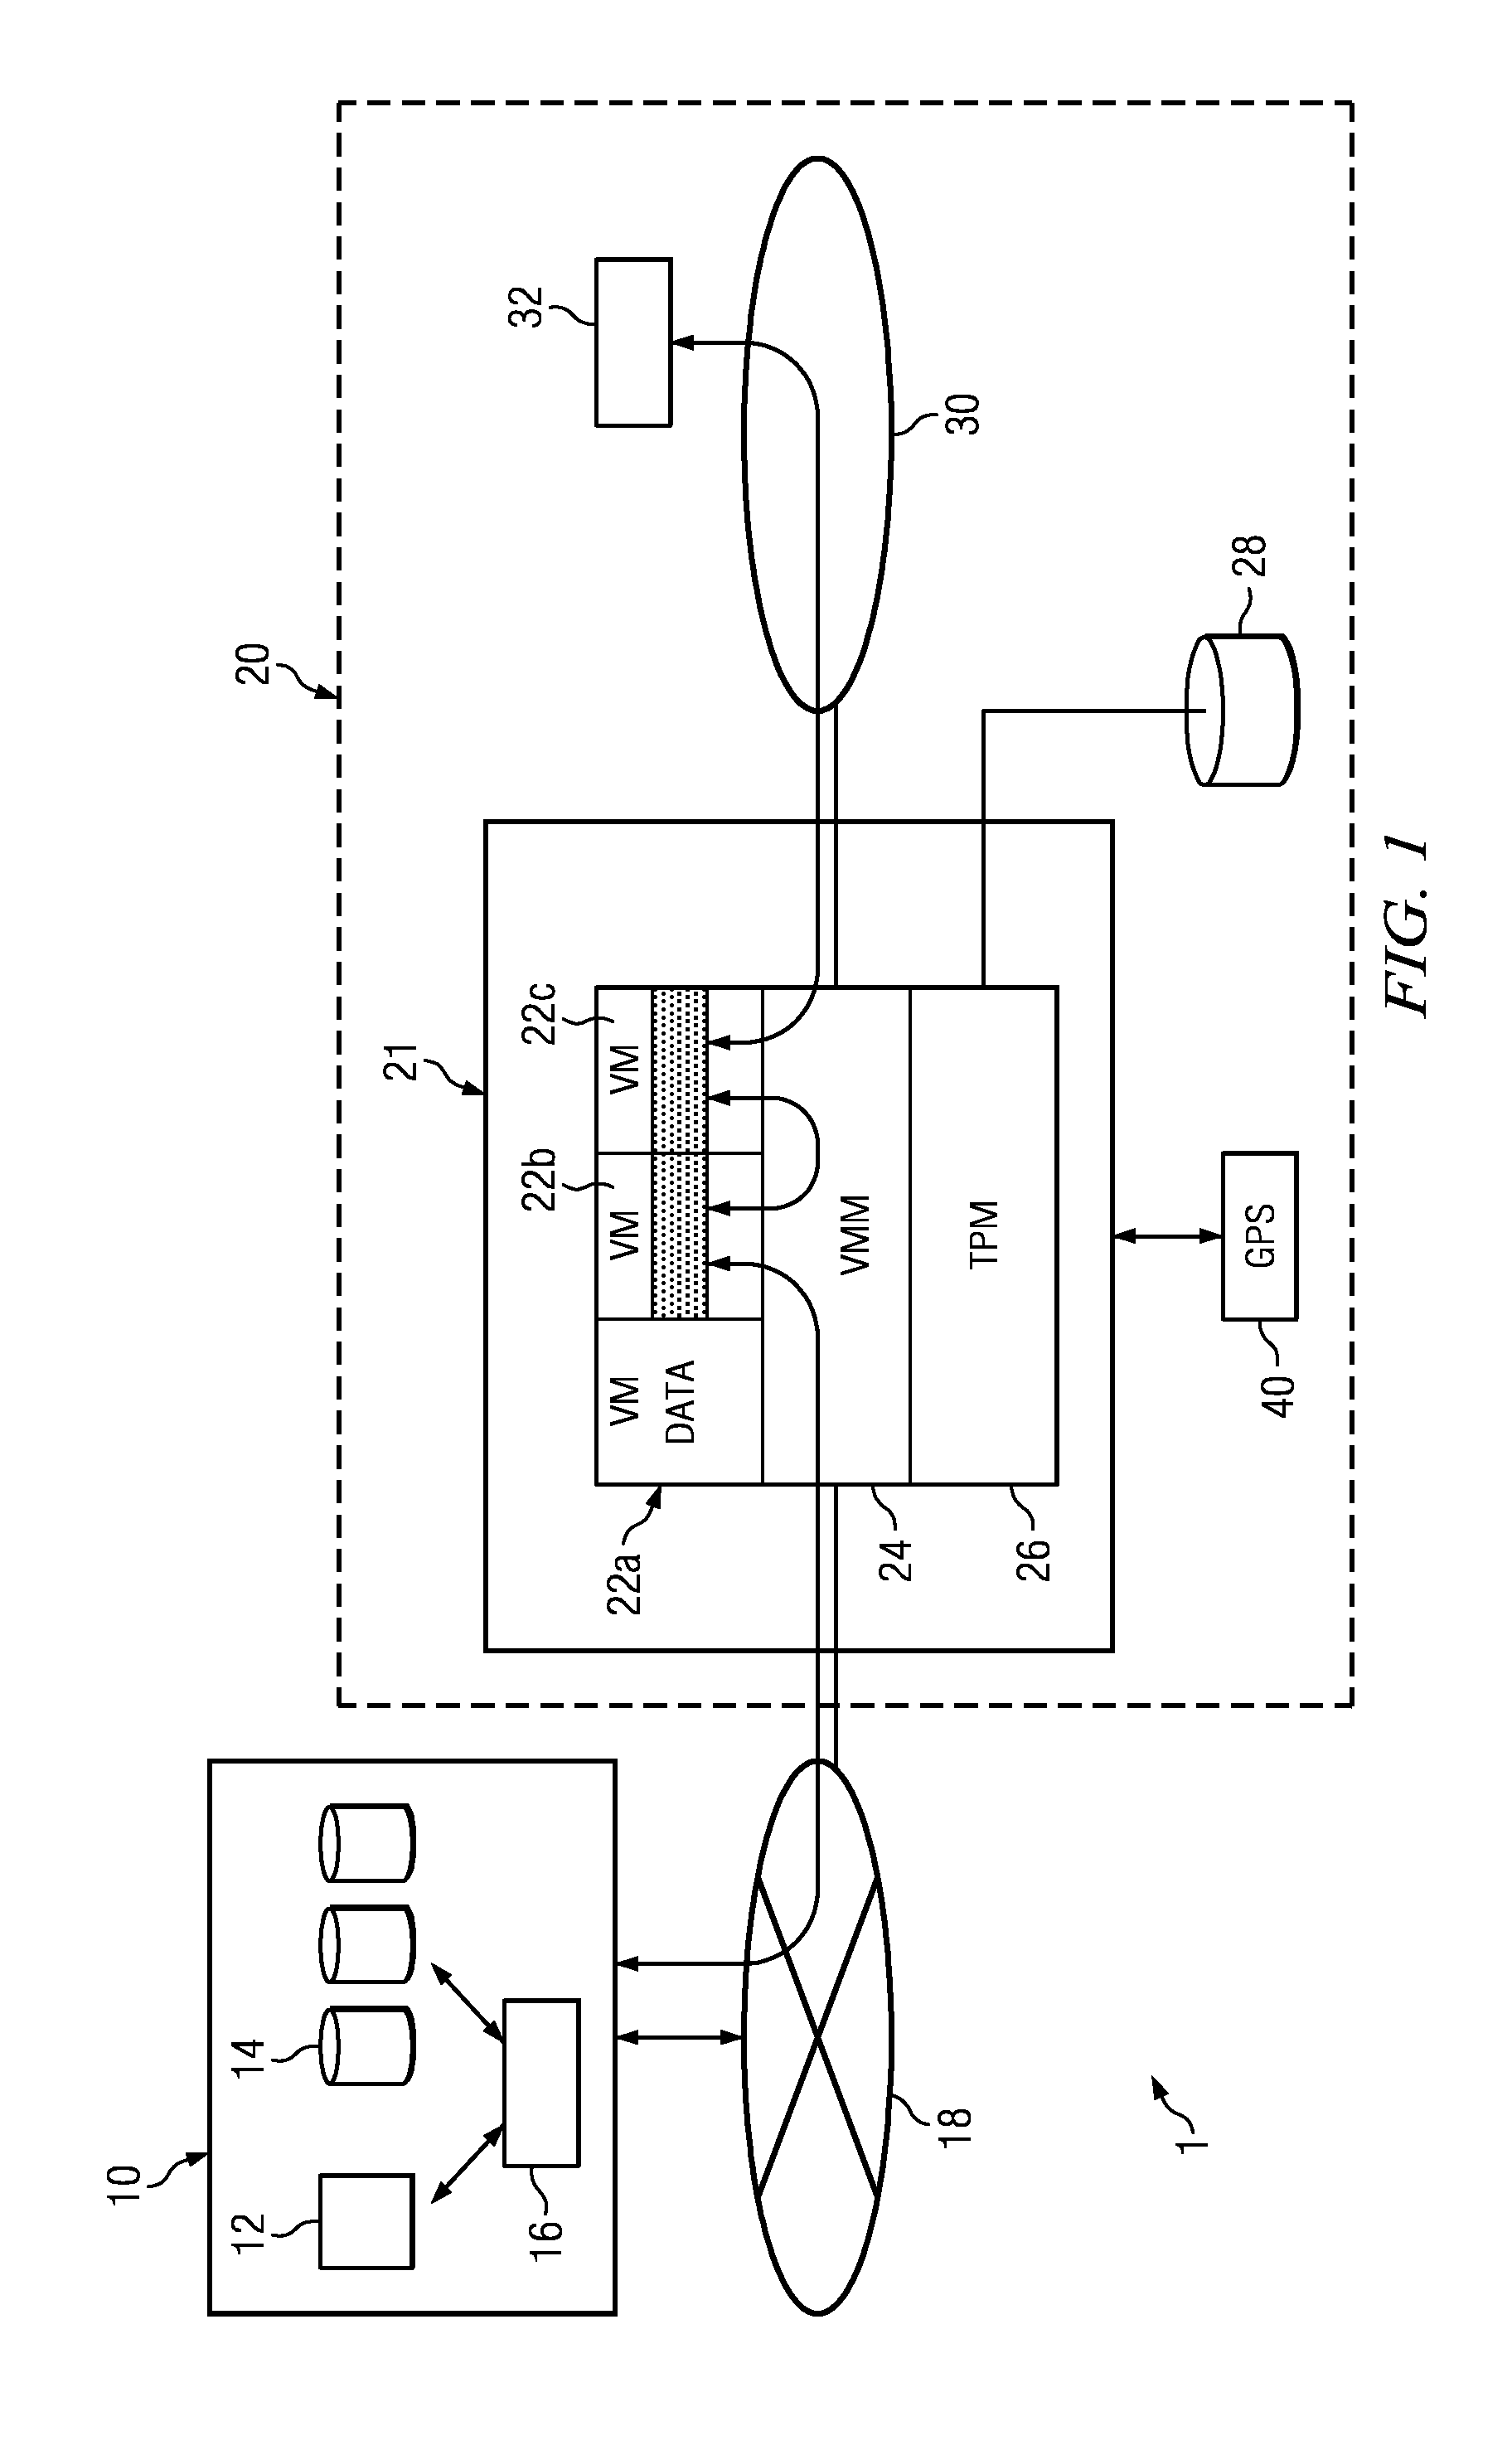 System and methods for remote maintenance in an electronic network with multiple clients